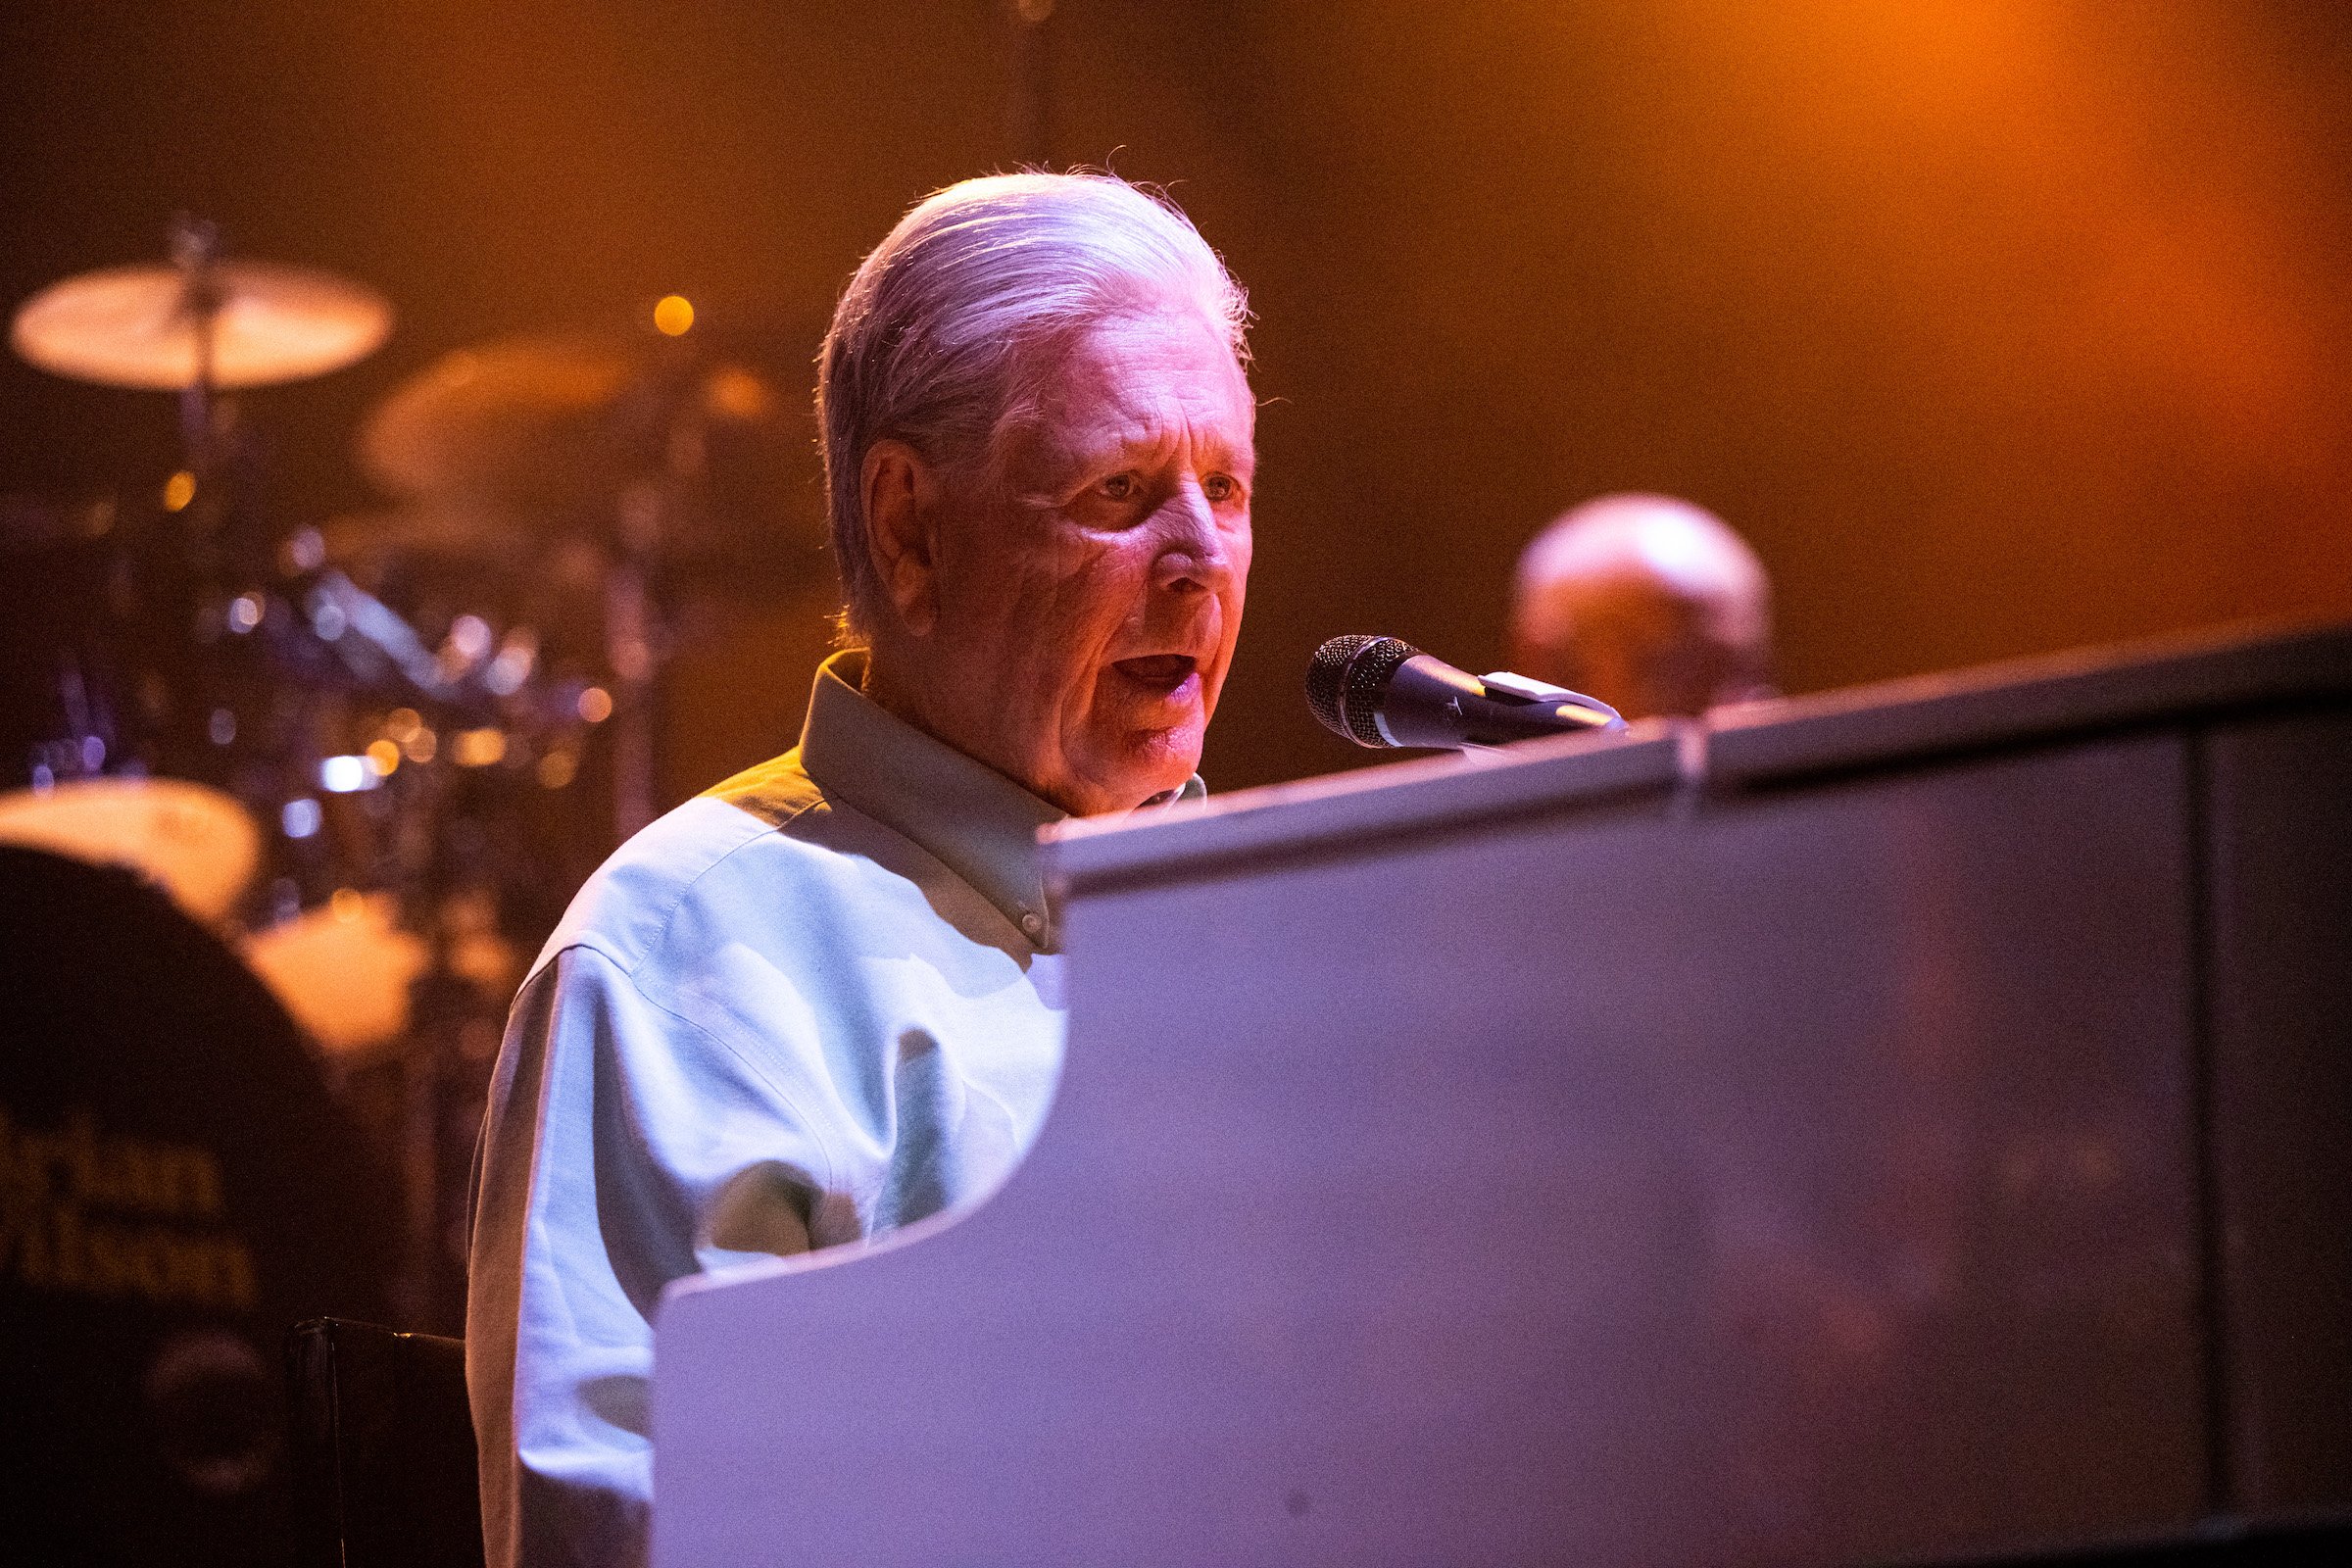 Musician Brian Wilson, founding member of The Beach Boys, performs on stage at the Kia Forum